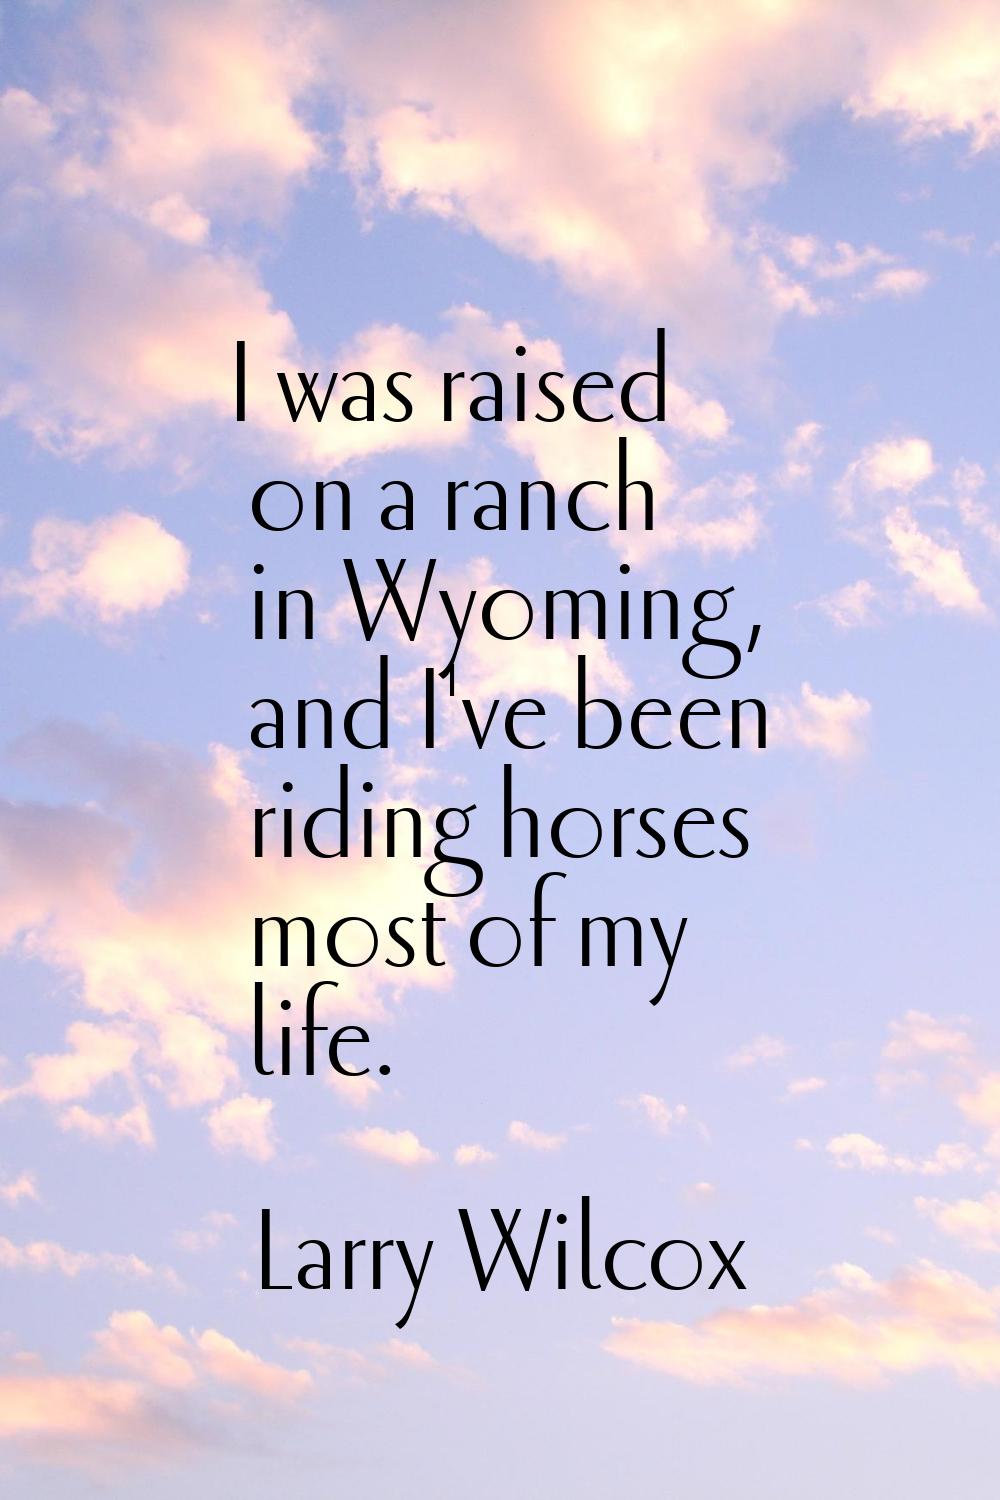 I was raised on a ranch in Wyoming, and I've been riding horses most of my life.